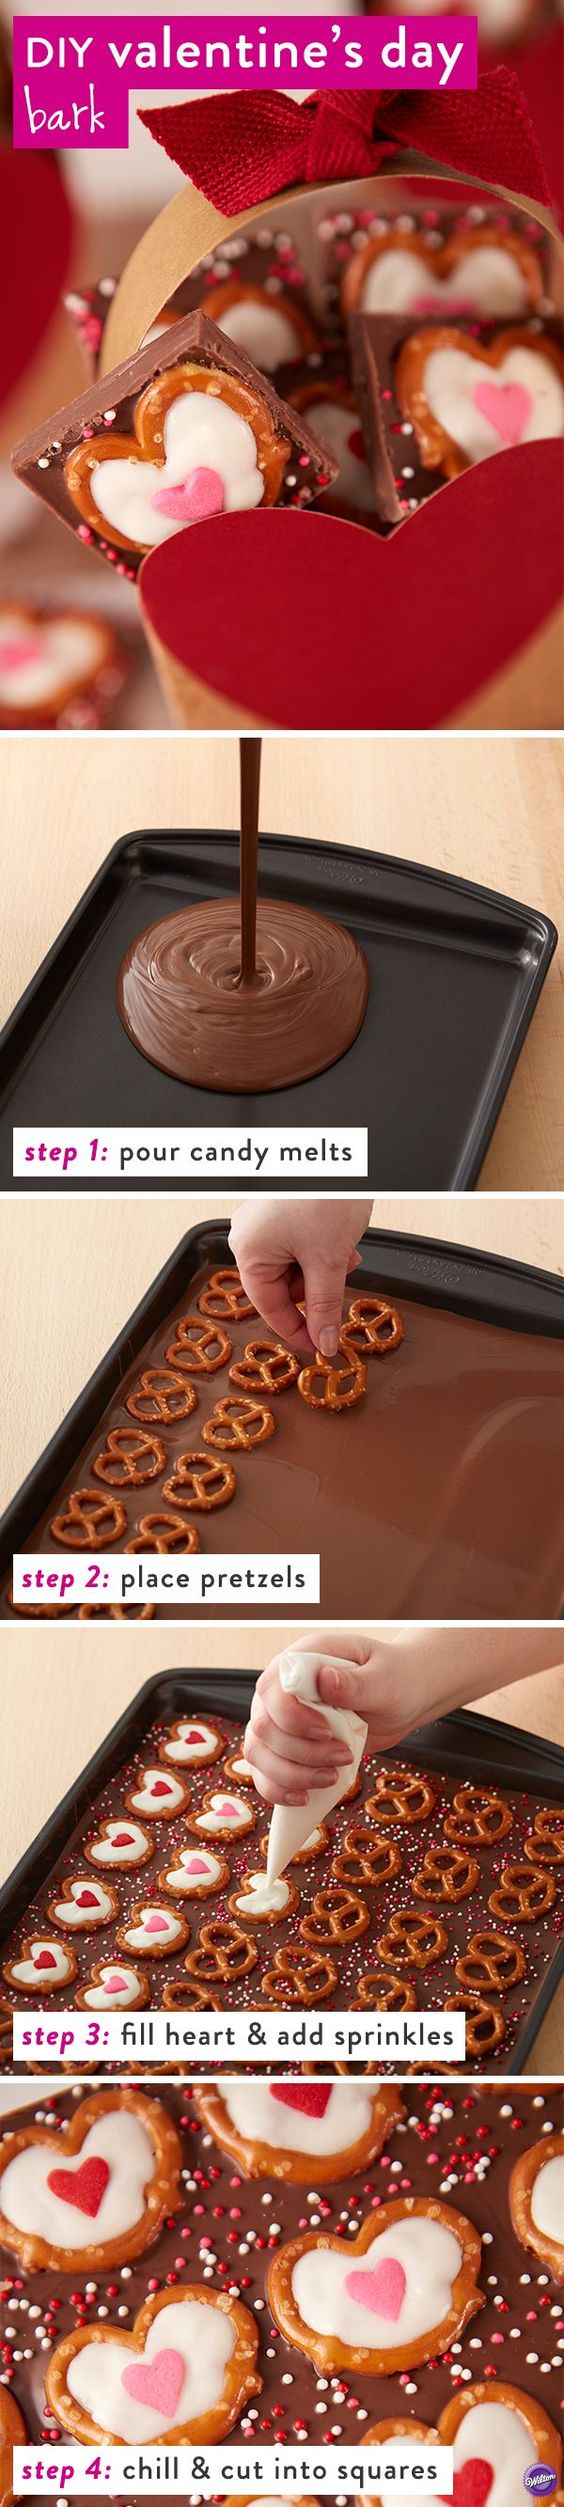 Candy Melts Treats for Your Valentine. 